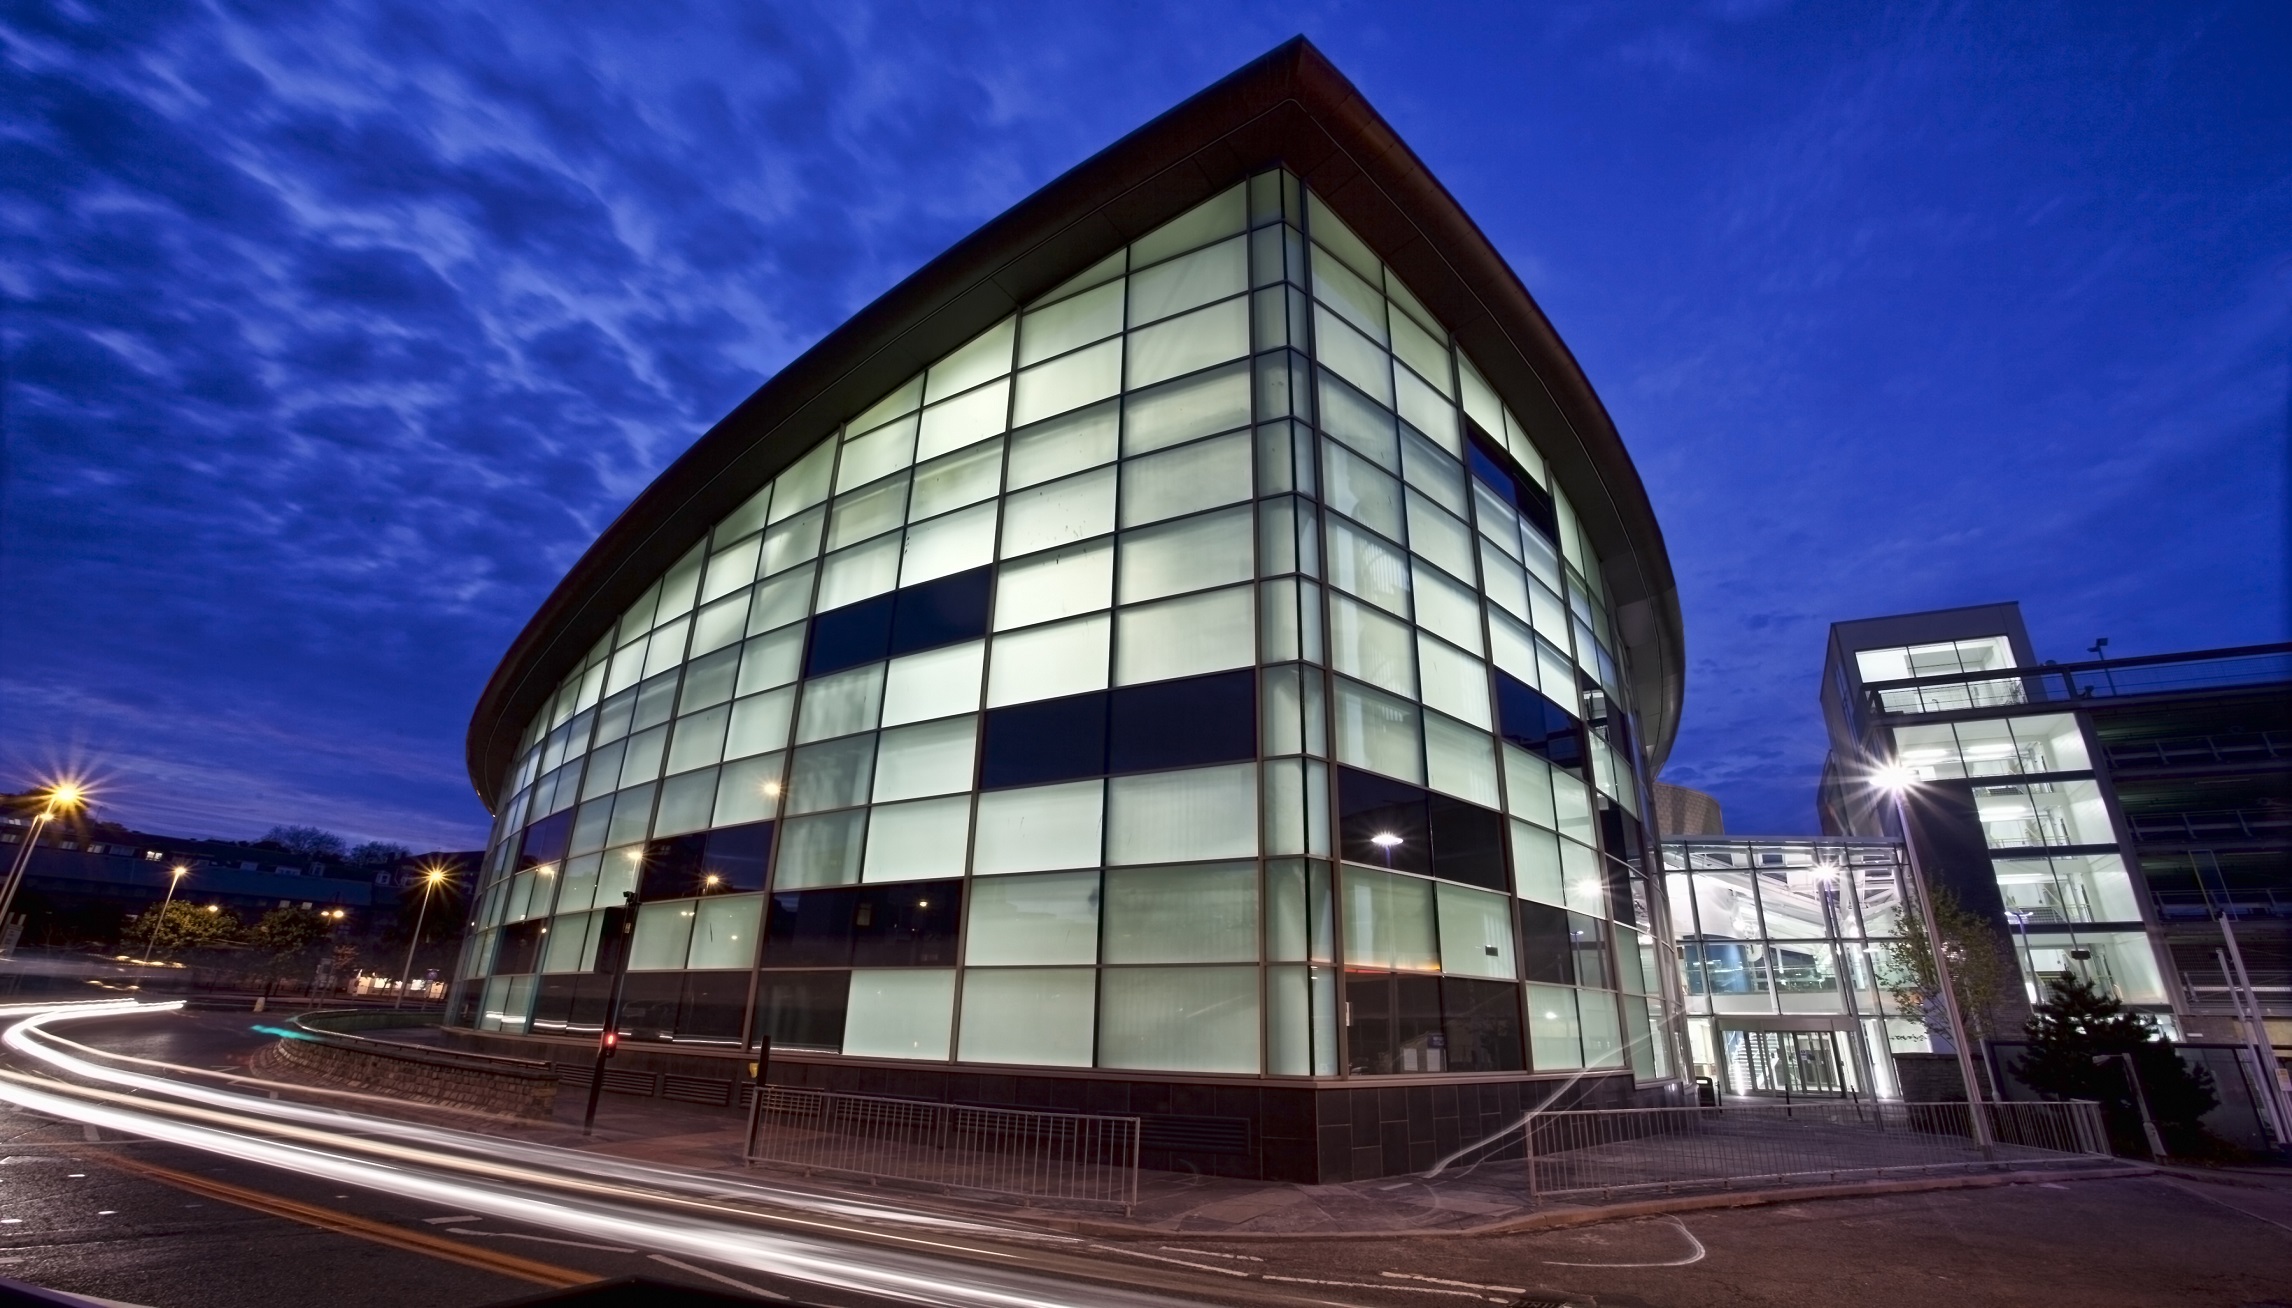 45-week maintenance programme outlined for Dundee leisure centre